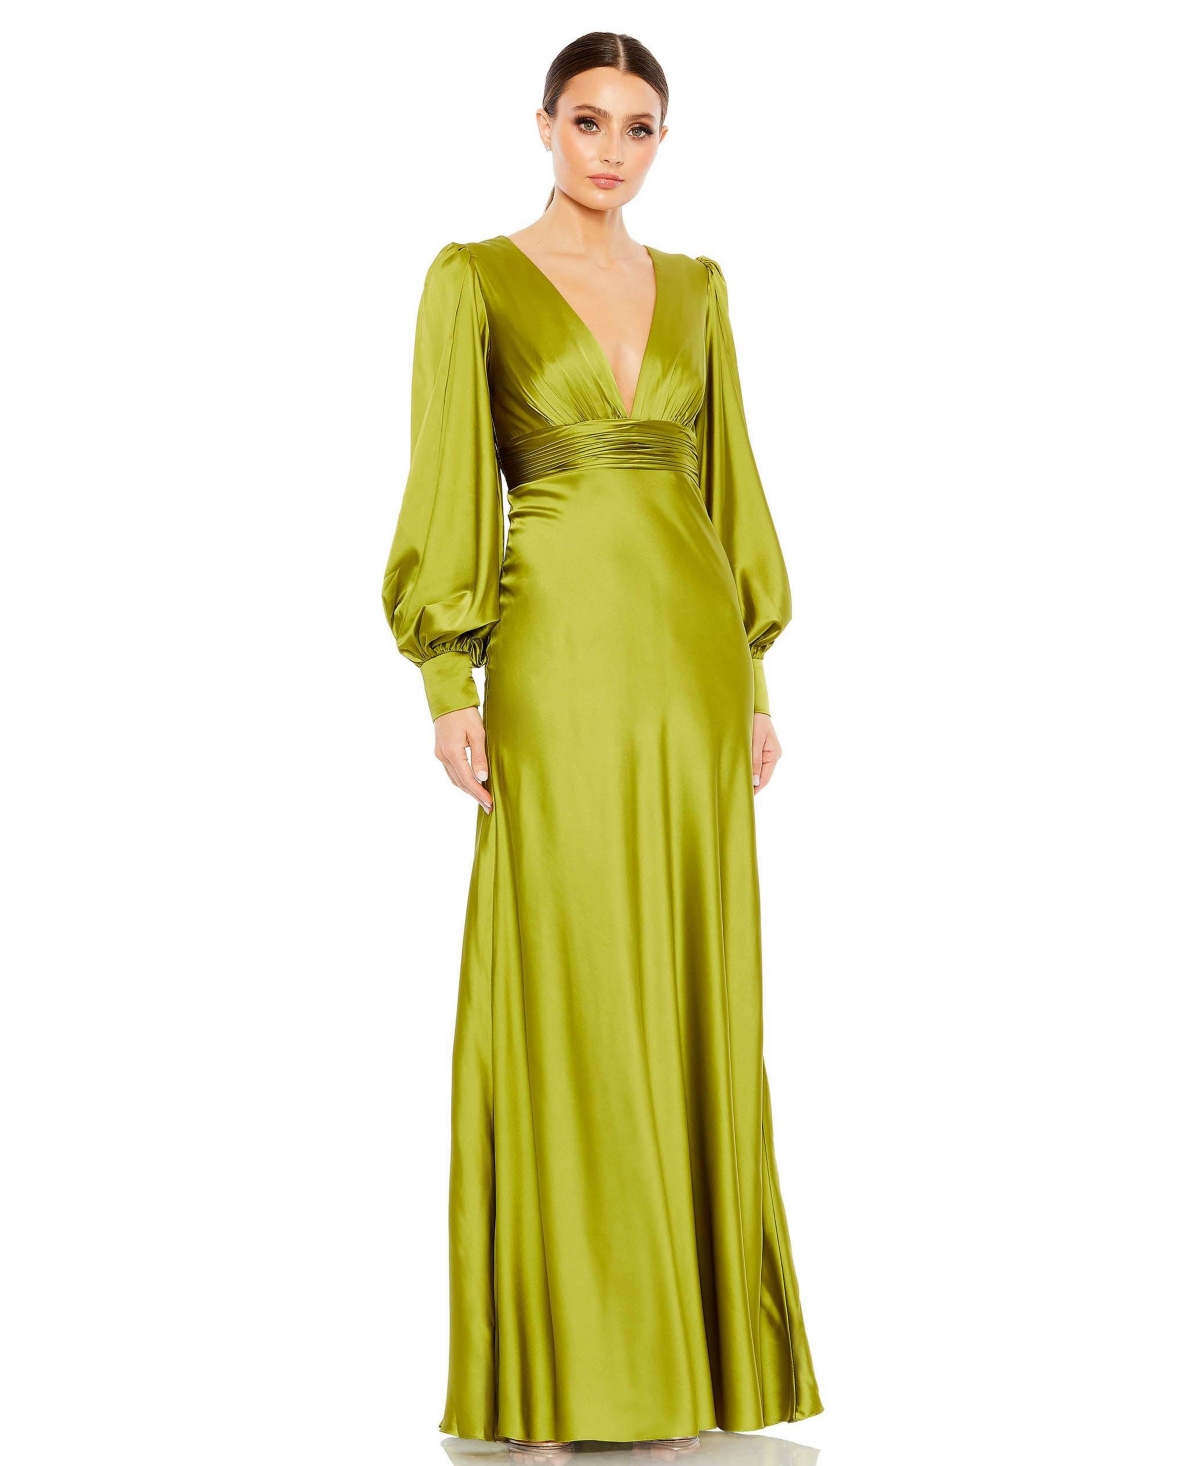 1930s Clothing and Fashion for Women Womens Ieena Charmeuse Bishop Sleeve V Neck Gown - Apple green $498.00 AT vintagedancer.com